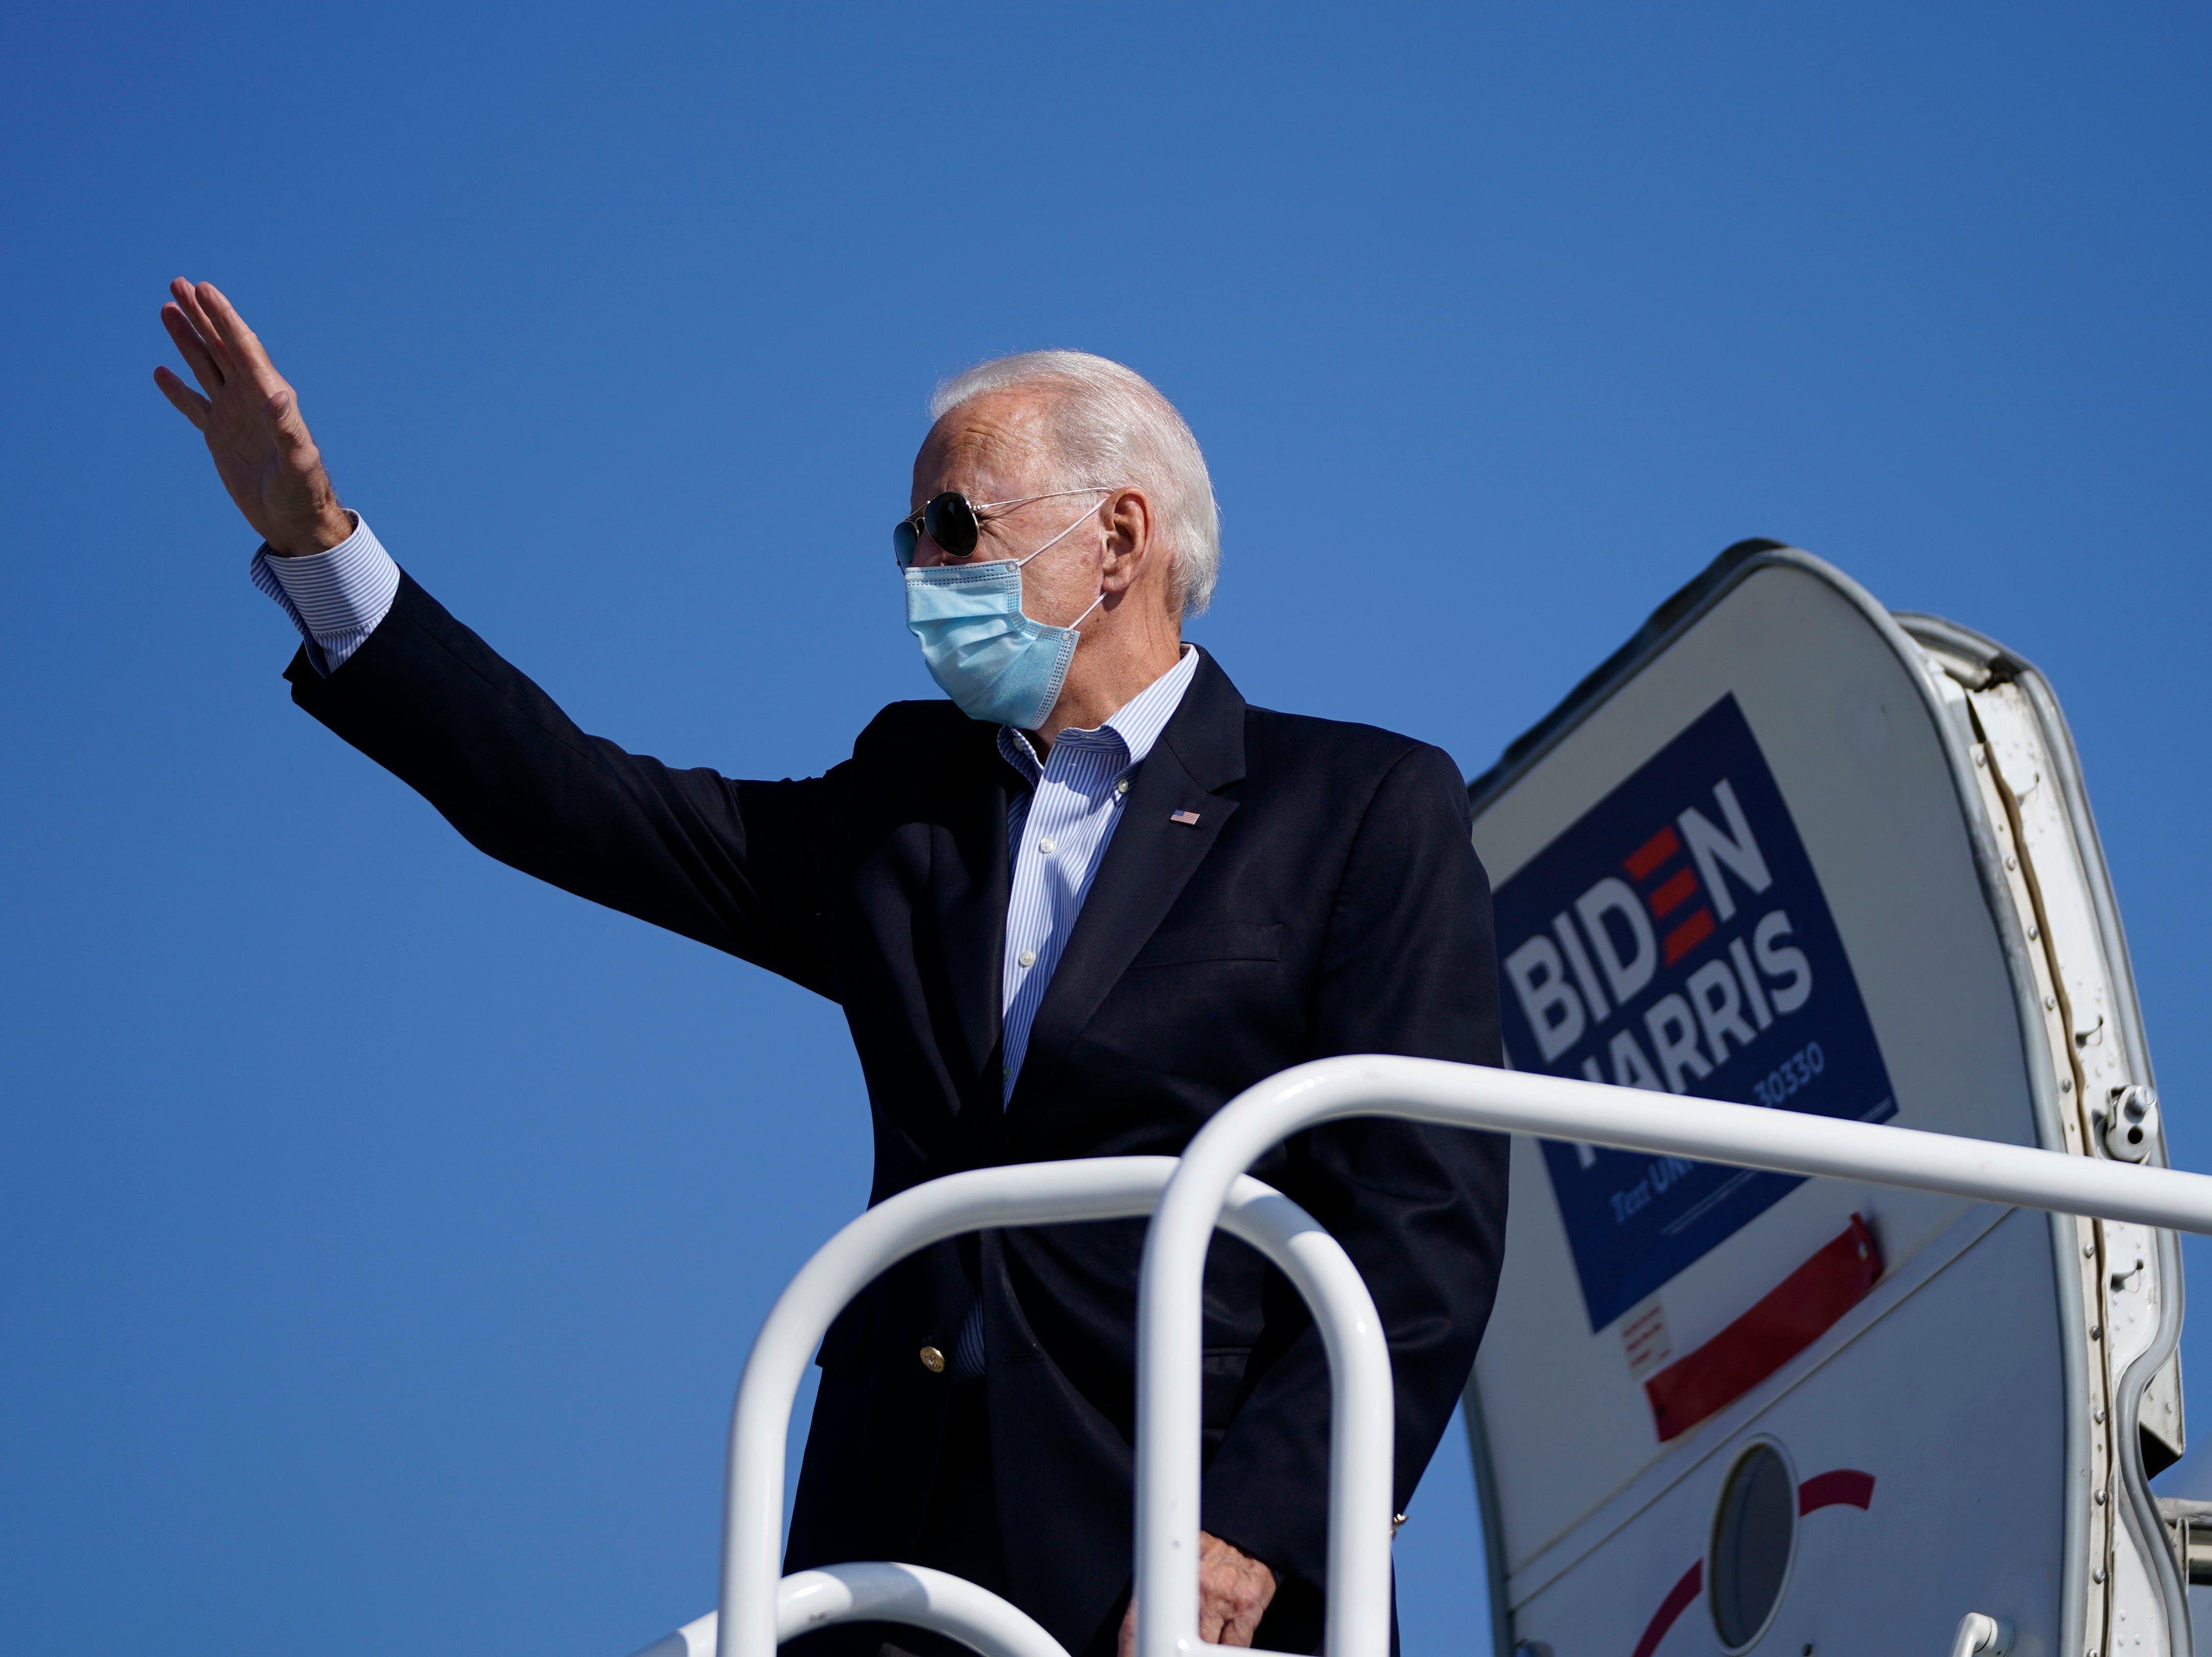 Democratic presidential nominee Joe Biden waves before boarding his campaign plane at New Castle Airport on 22 October 2020